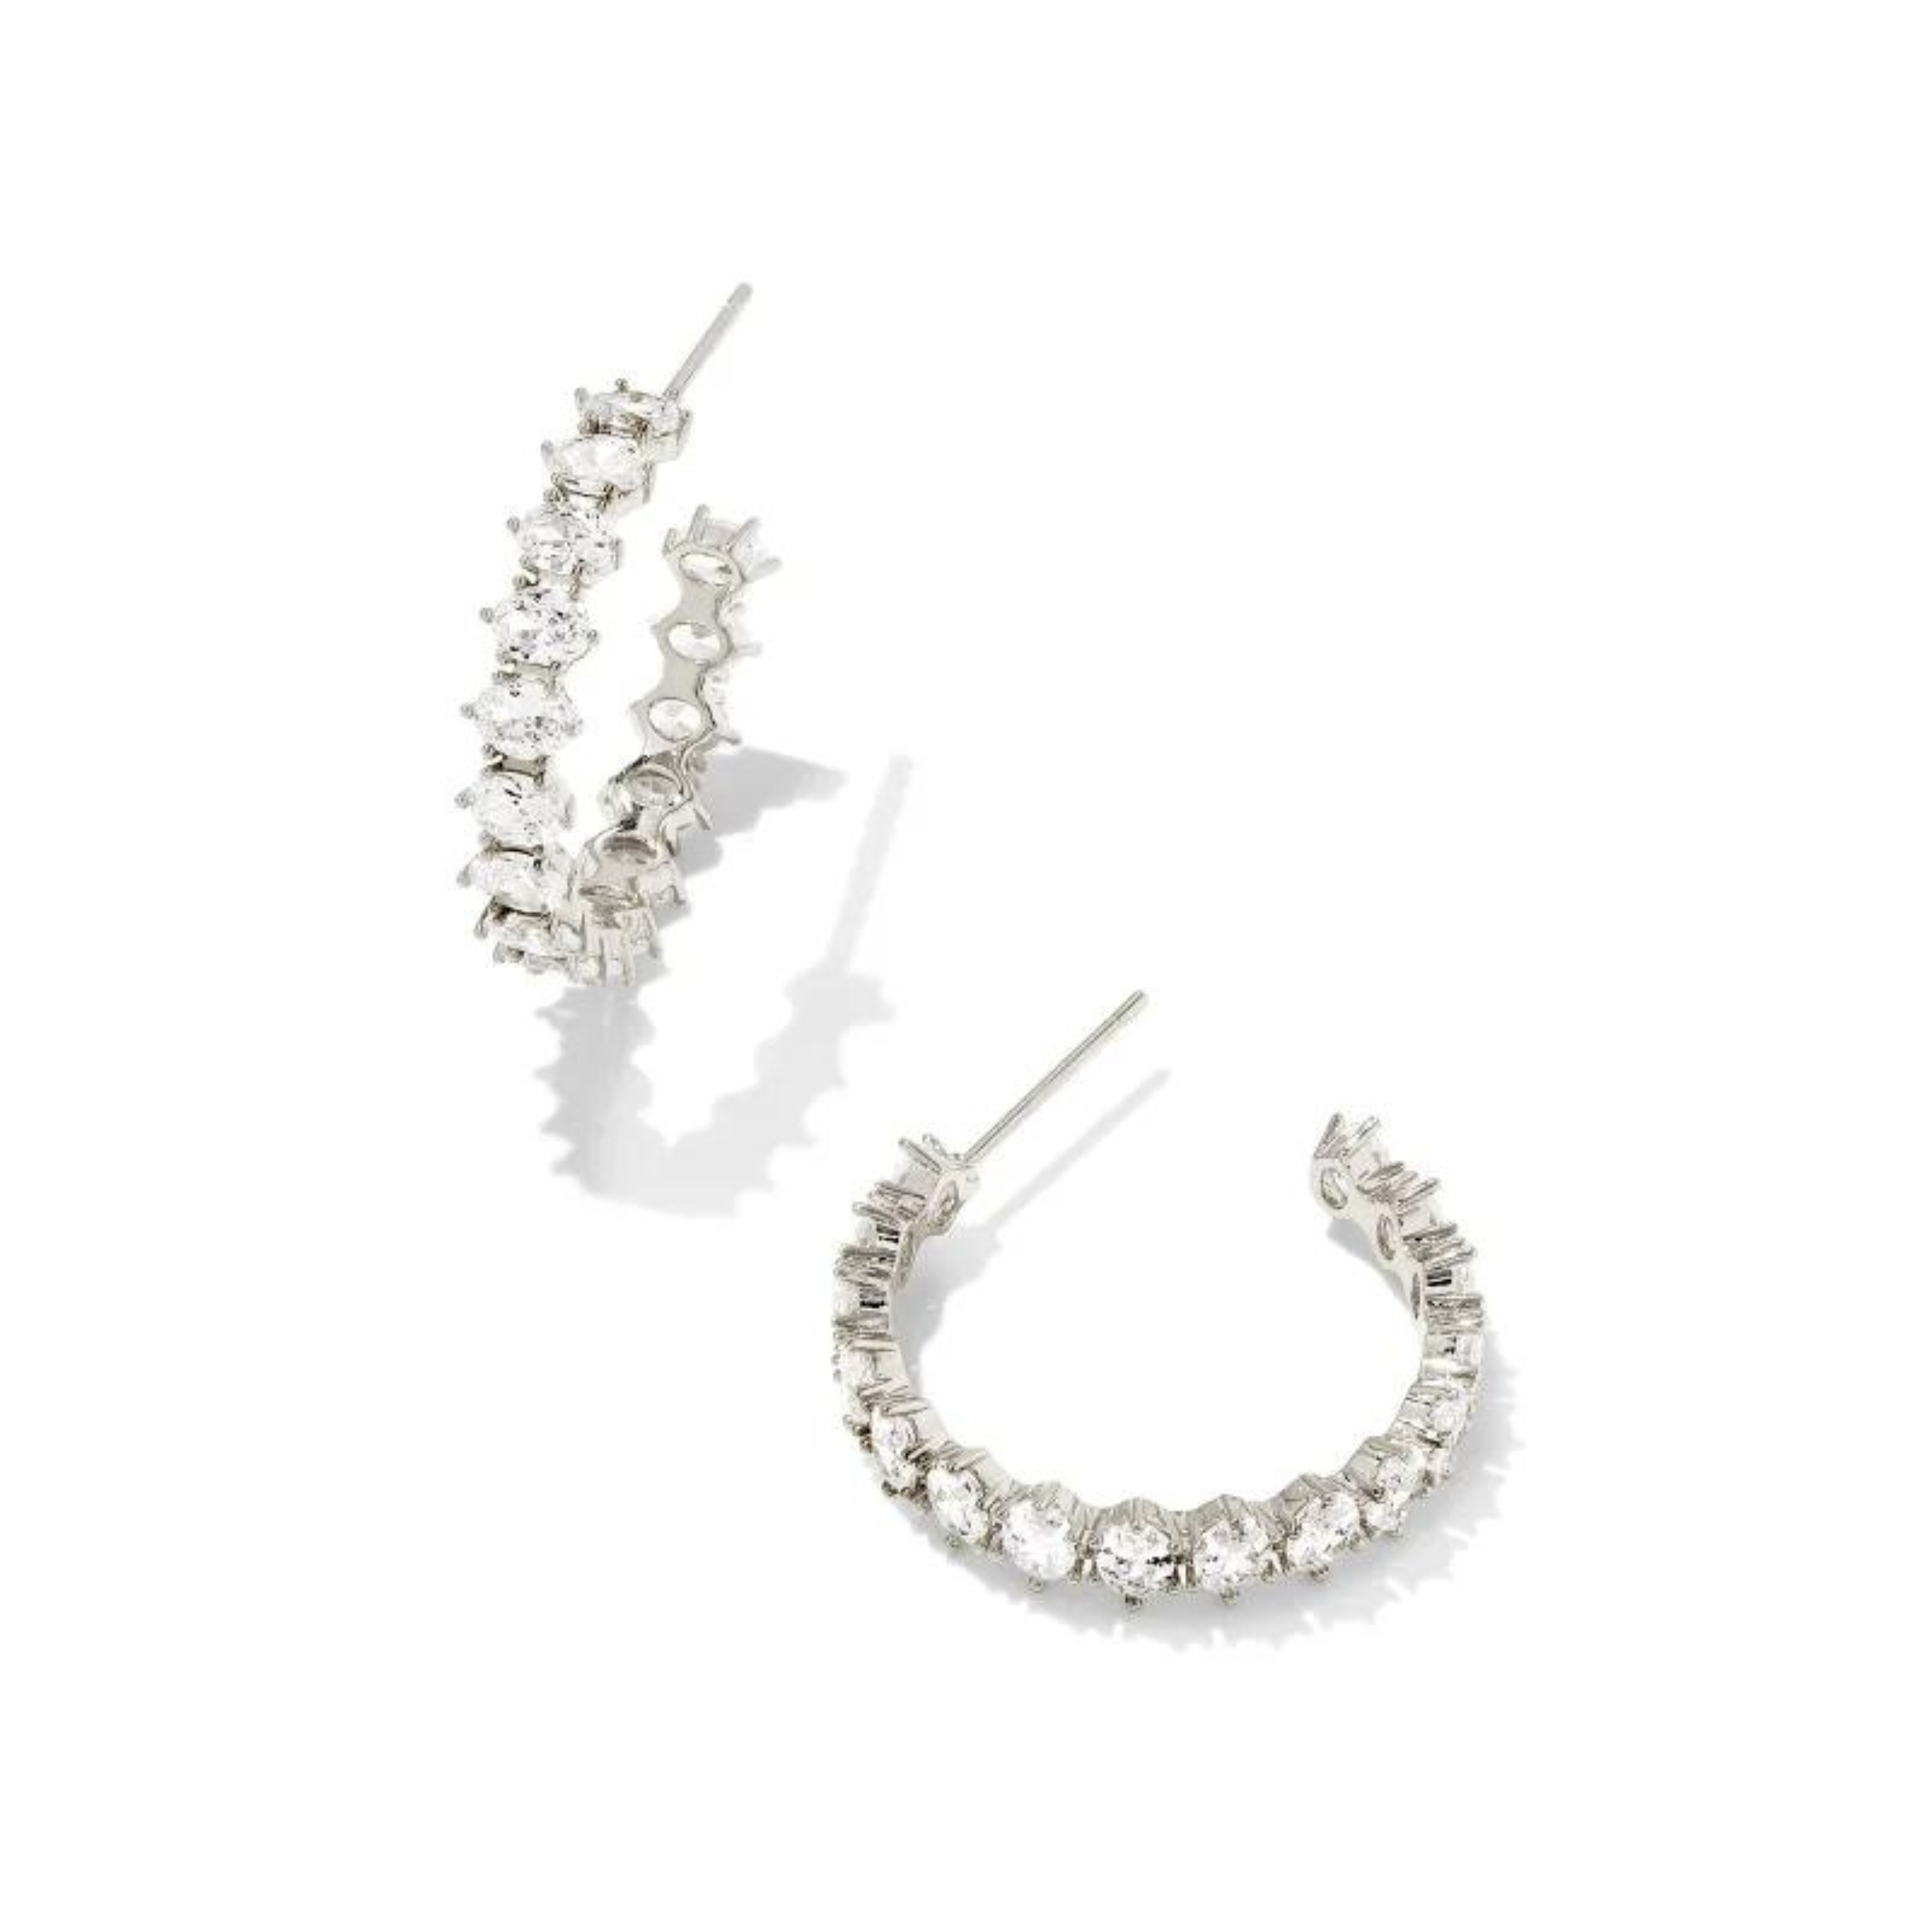 Pictured on a white background is a pair of silver hoop earrings with a oval, clear crystals. 